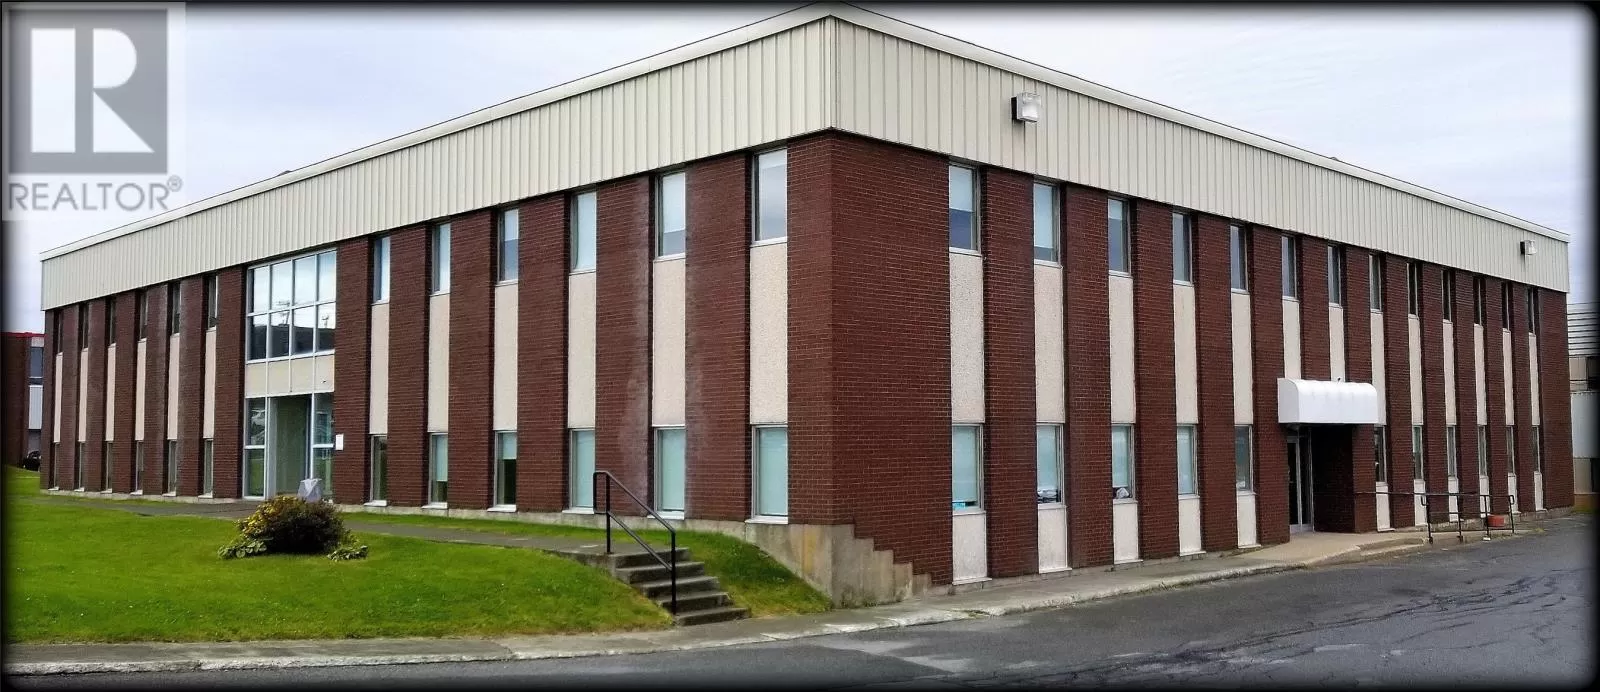 Offices for rent: 90 O'leary Avenue Unit#102, St. John's, Newfoundland & Labrador A1B 2C7